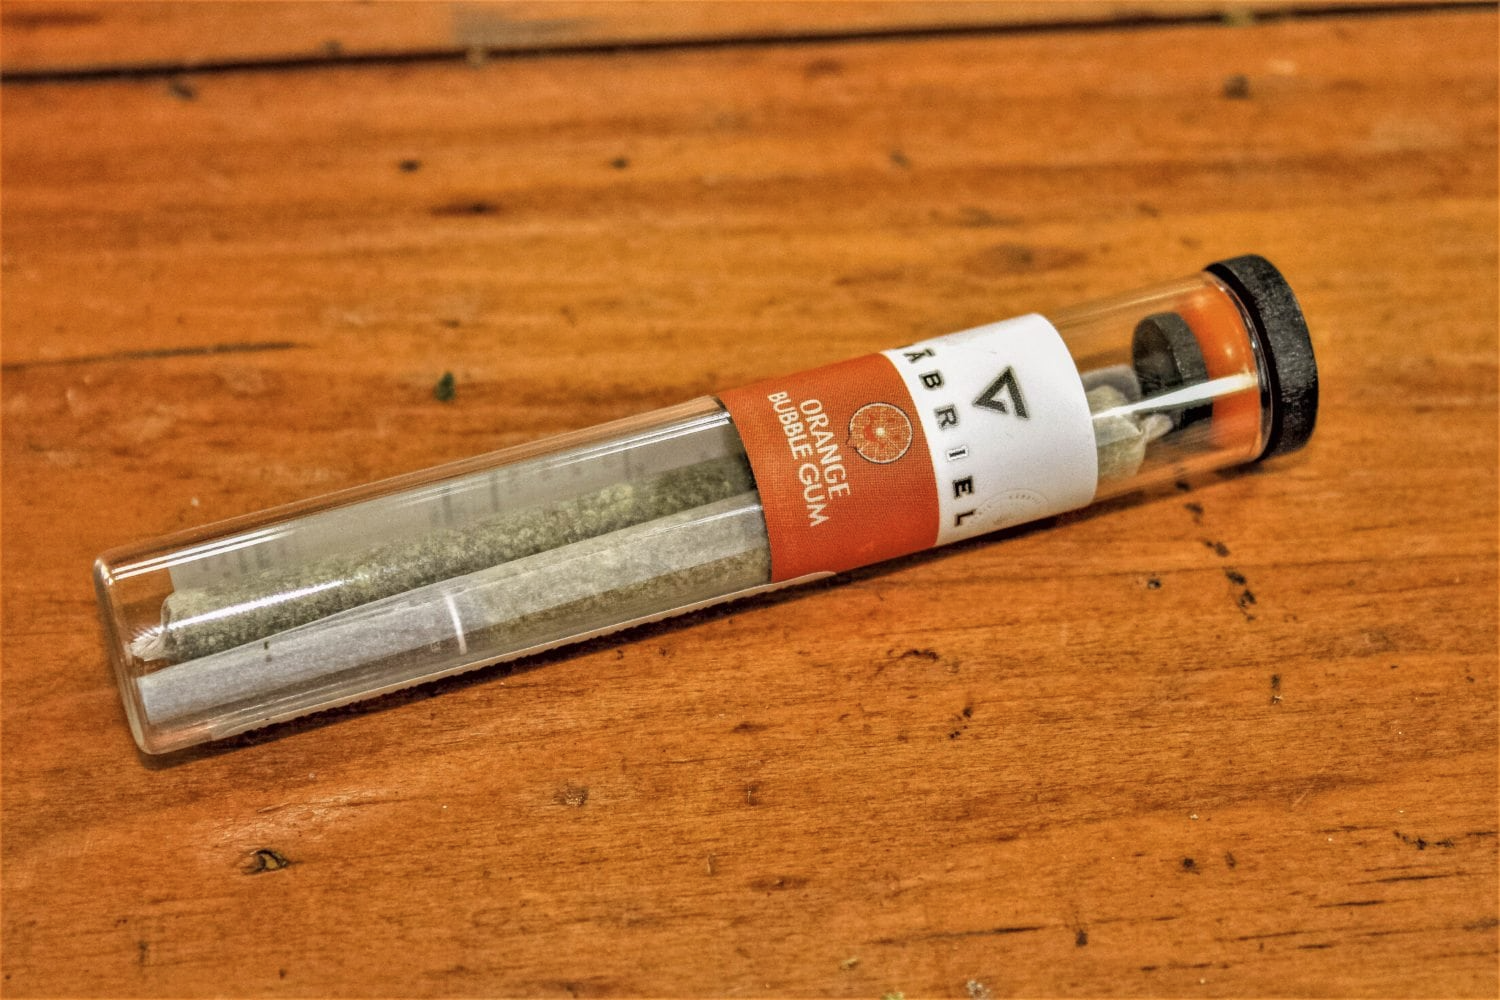 A pre-roll in a glass joint tube with a Gabriel branded label